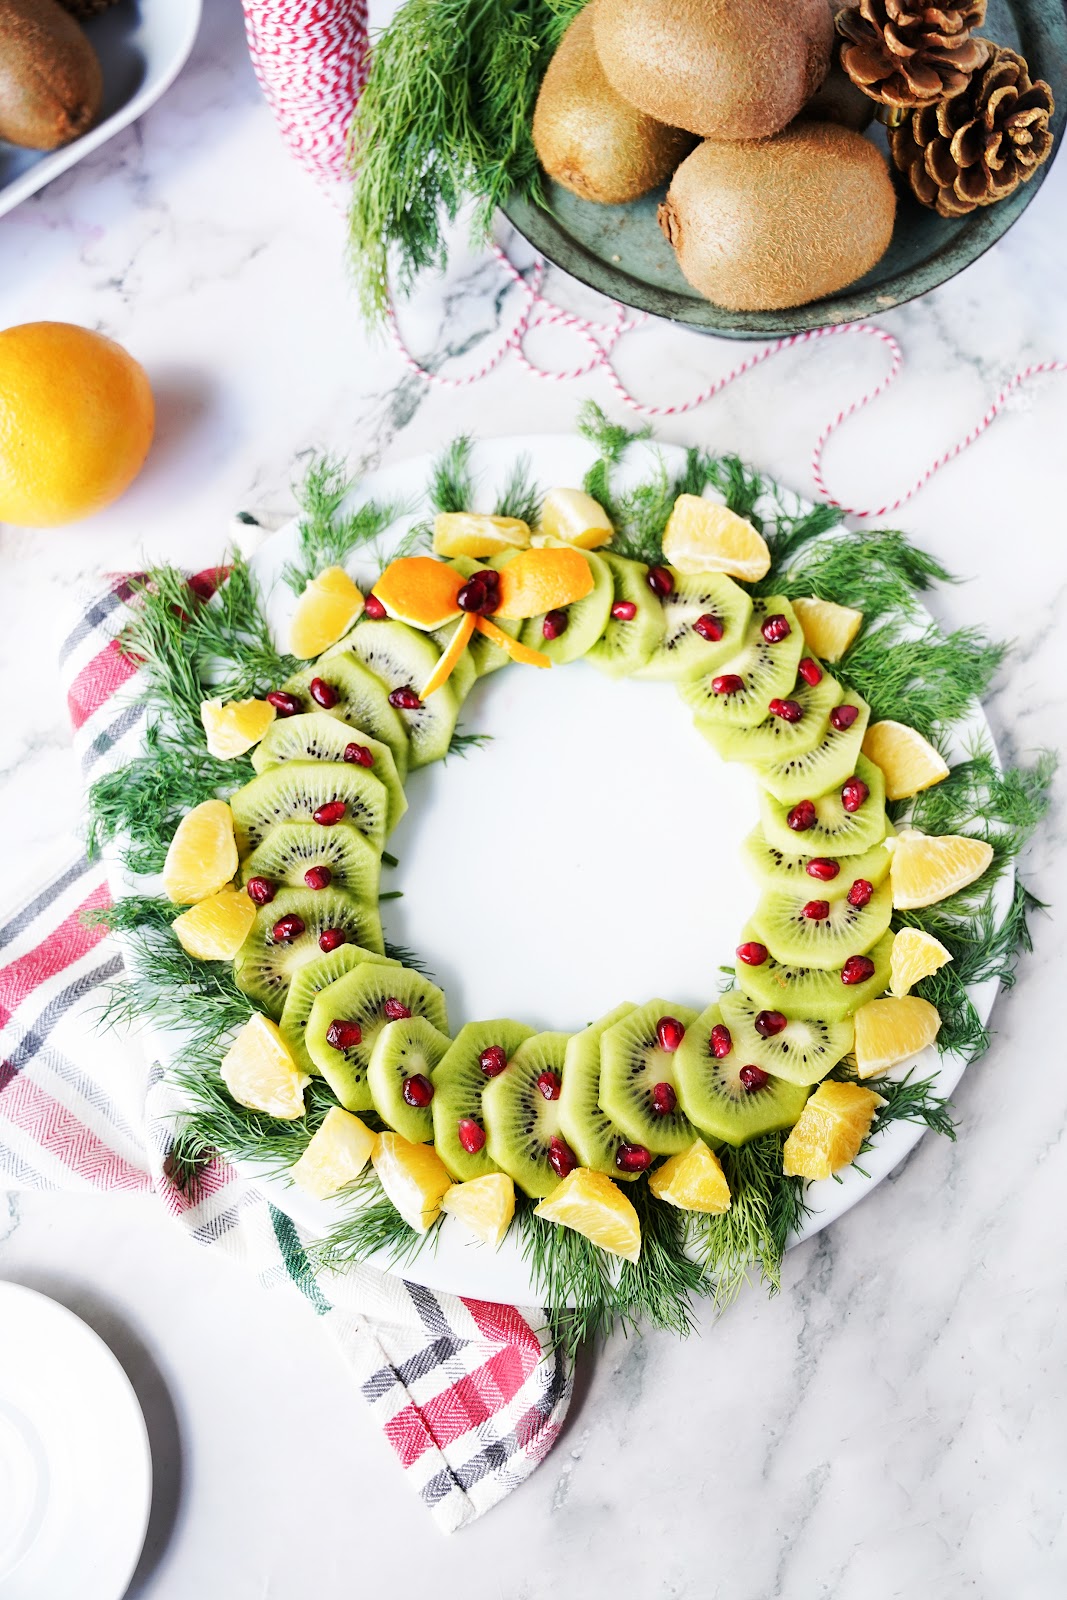 Lay leftover orange segments on the outside of the wreath.